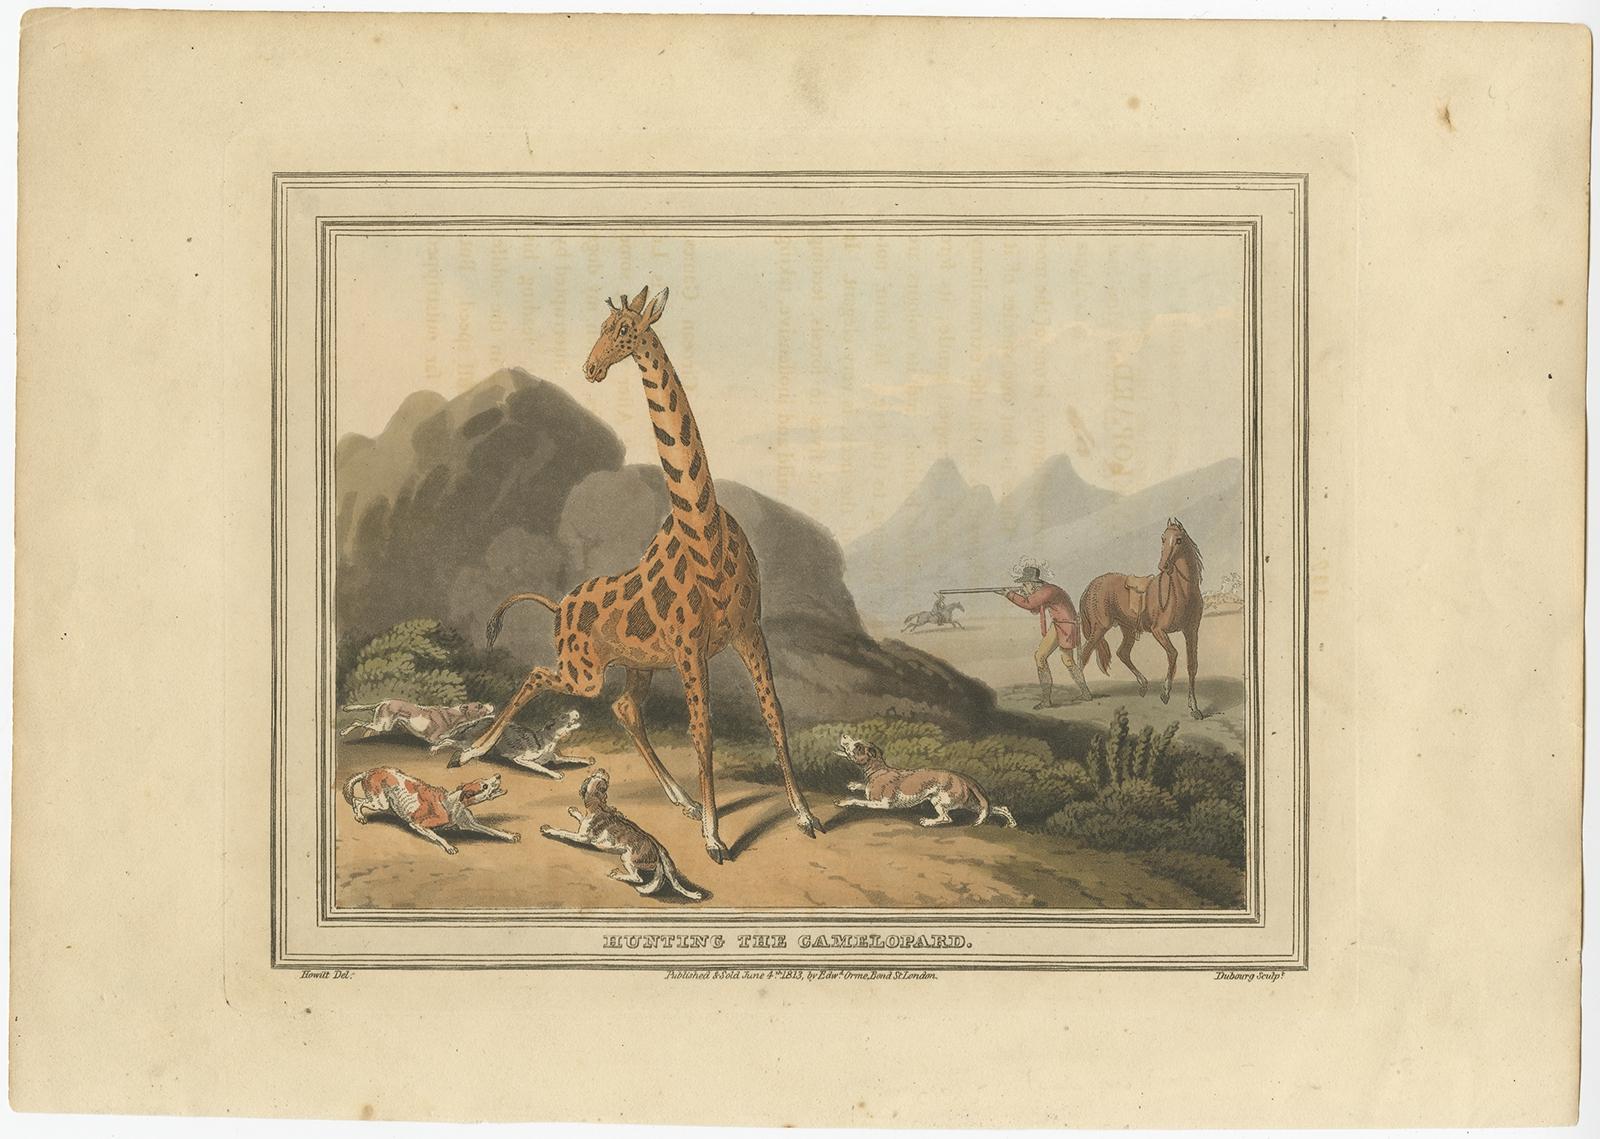 Antique print titled 'Hunting the Camelopard', the Giraffe was often called the camelopard. 

This print originates from Samuel Howitt's 'Foreign Field Sports'.

Artists and Engravers: Samuel Howitt was an English painter, illustrator and etcher